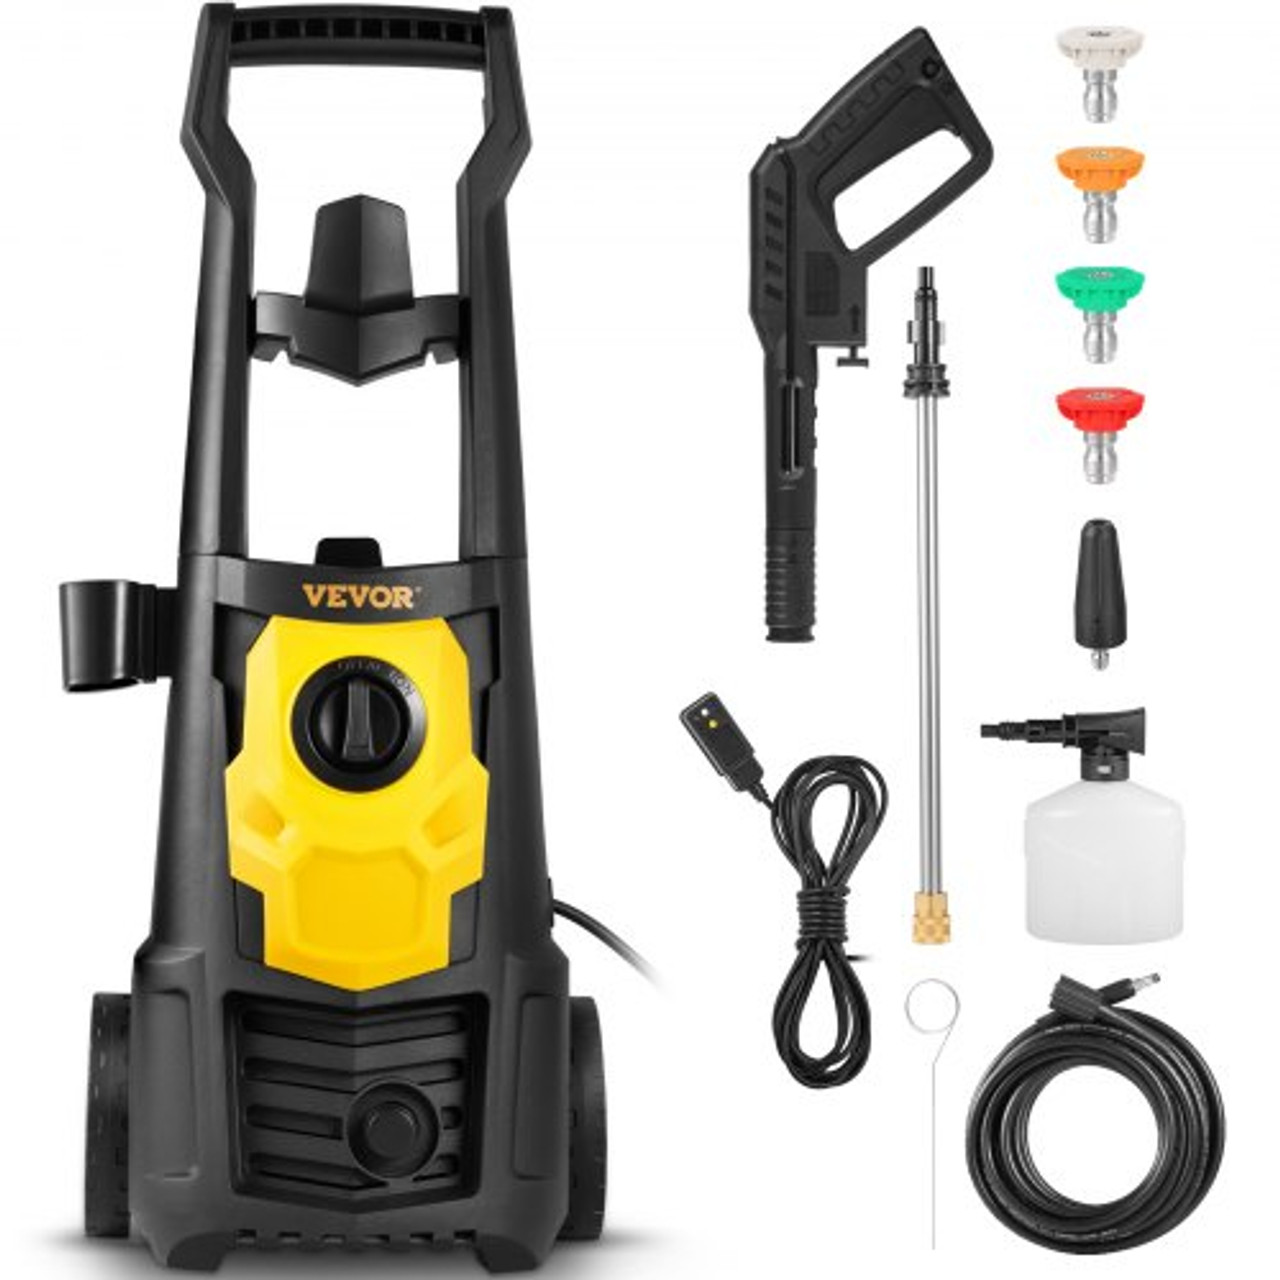 Electric Power Washer, 2000 PSI, Max 1.65 GPM Pressure Washer w/ 30 ft Hose & Reel, 5 Quick Connect Nozzles, Foam Cannon, Portable to Clean Patios, Cars, Fences, Driveways, ETL Listed